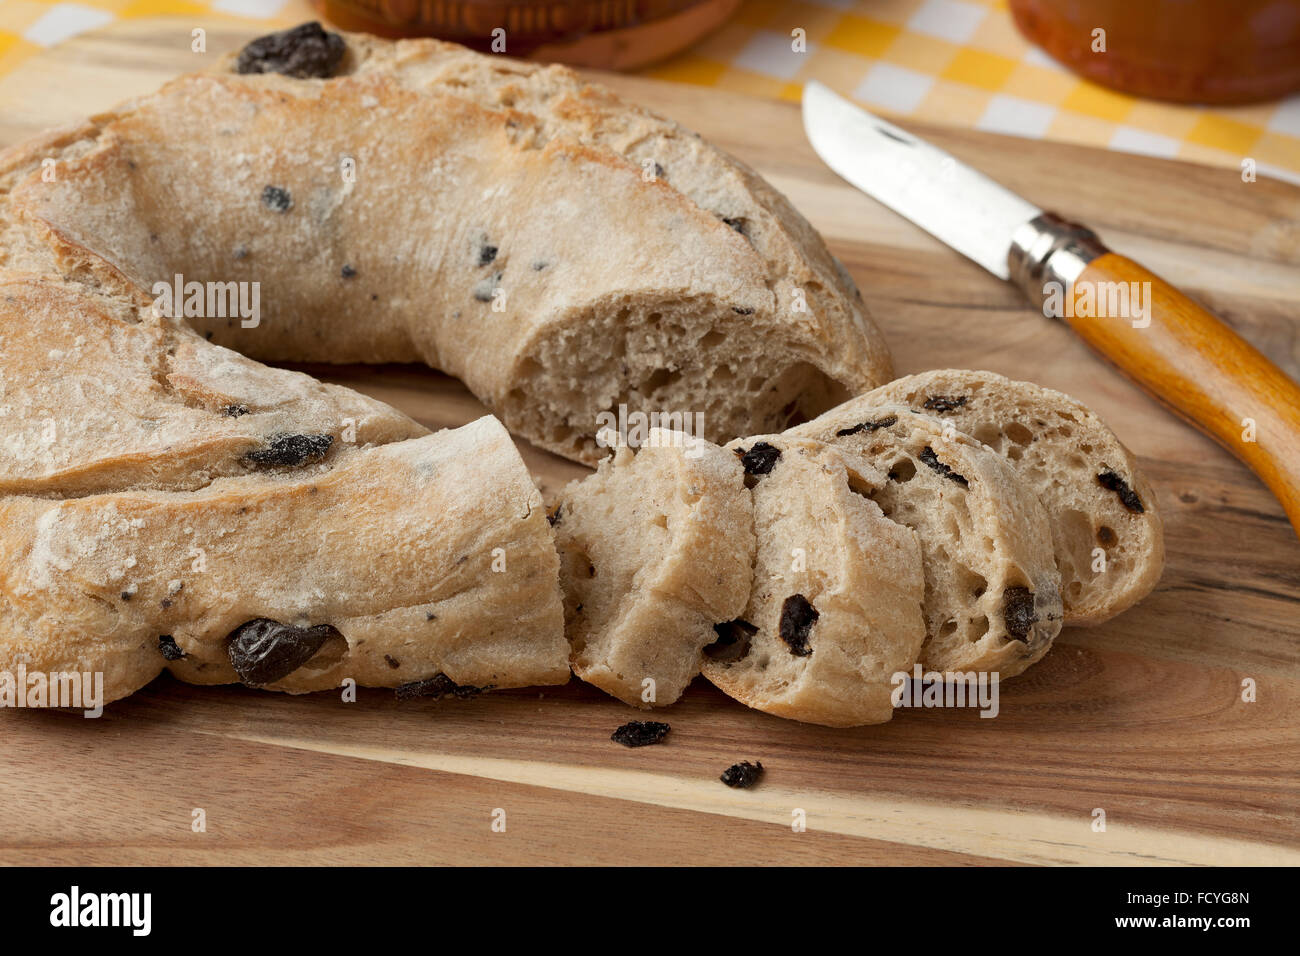 Fresh baked black olive bread and slices Stock Photo